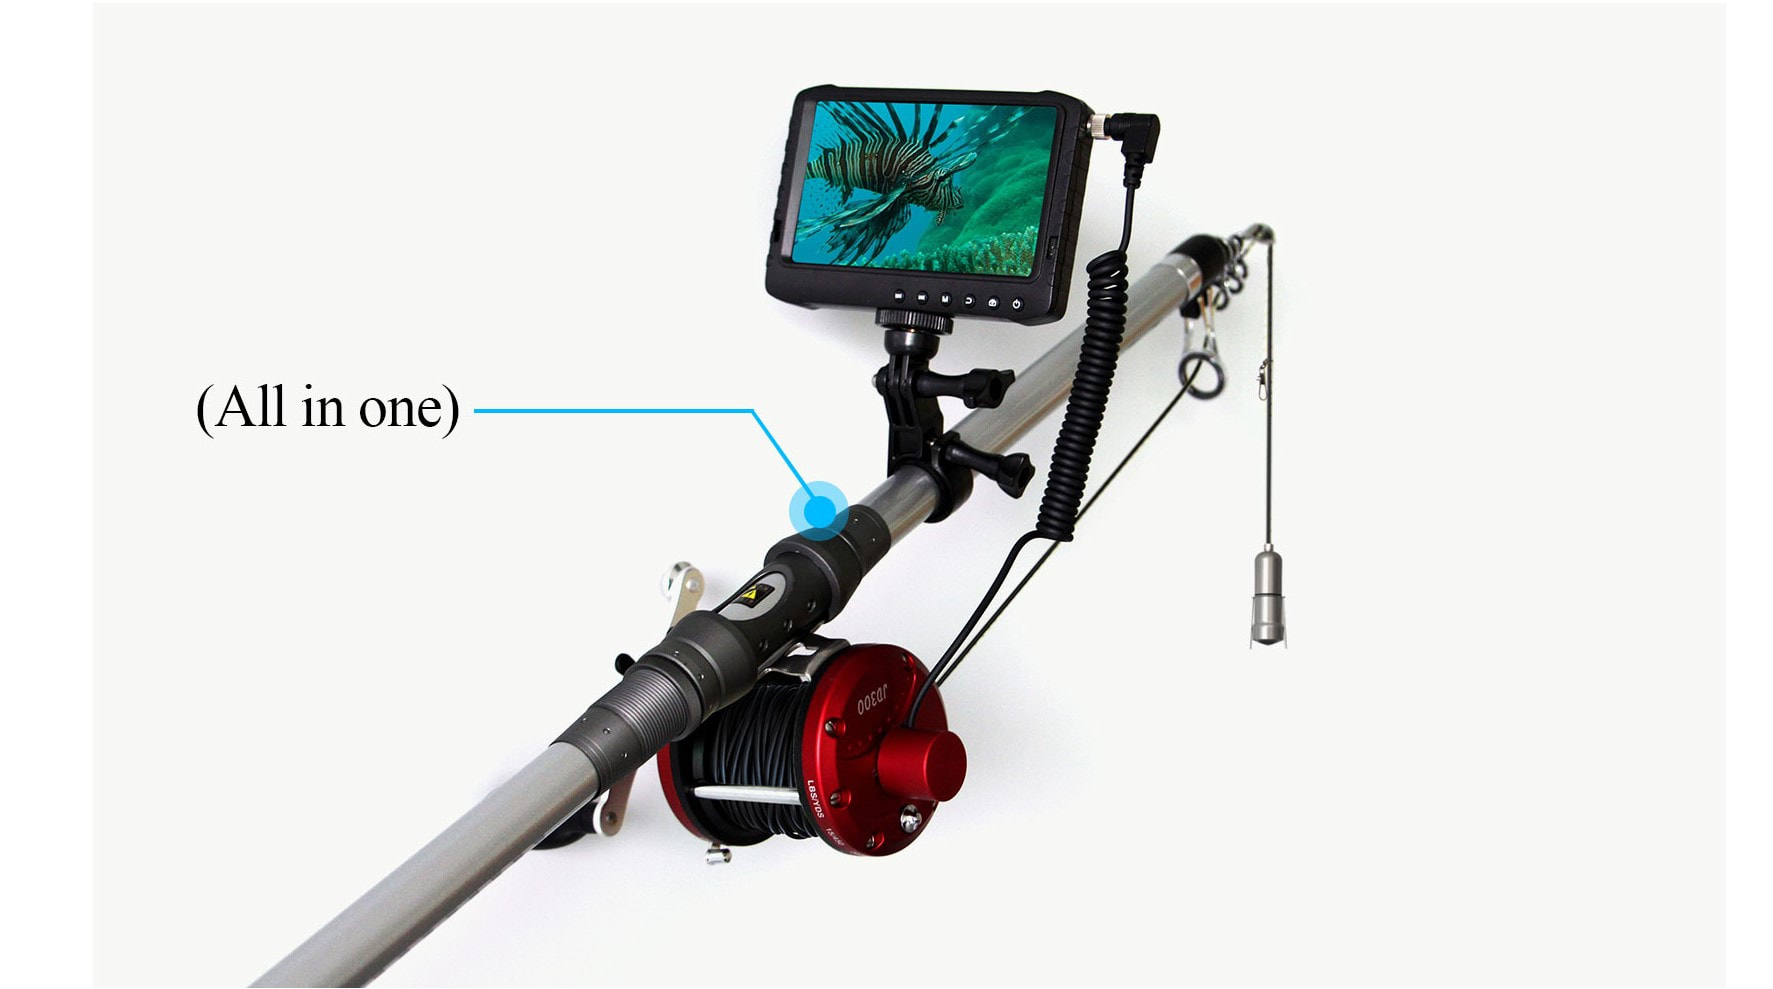 Vividia FP-420 all-in-one fishing rod with 2MP underwater camera